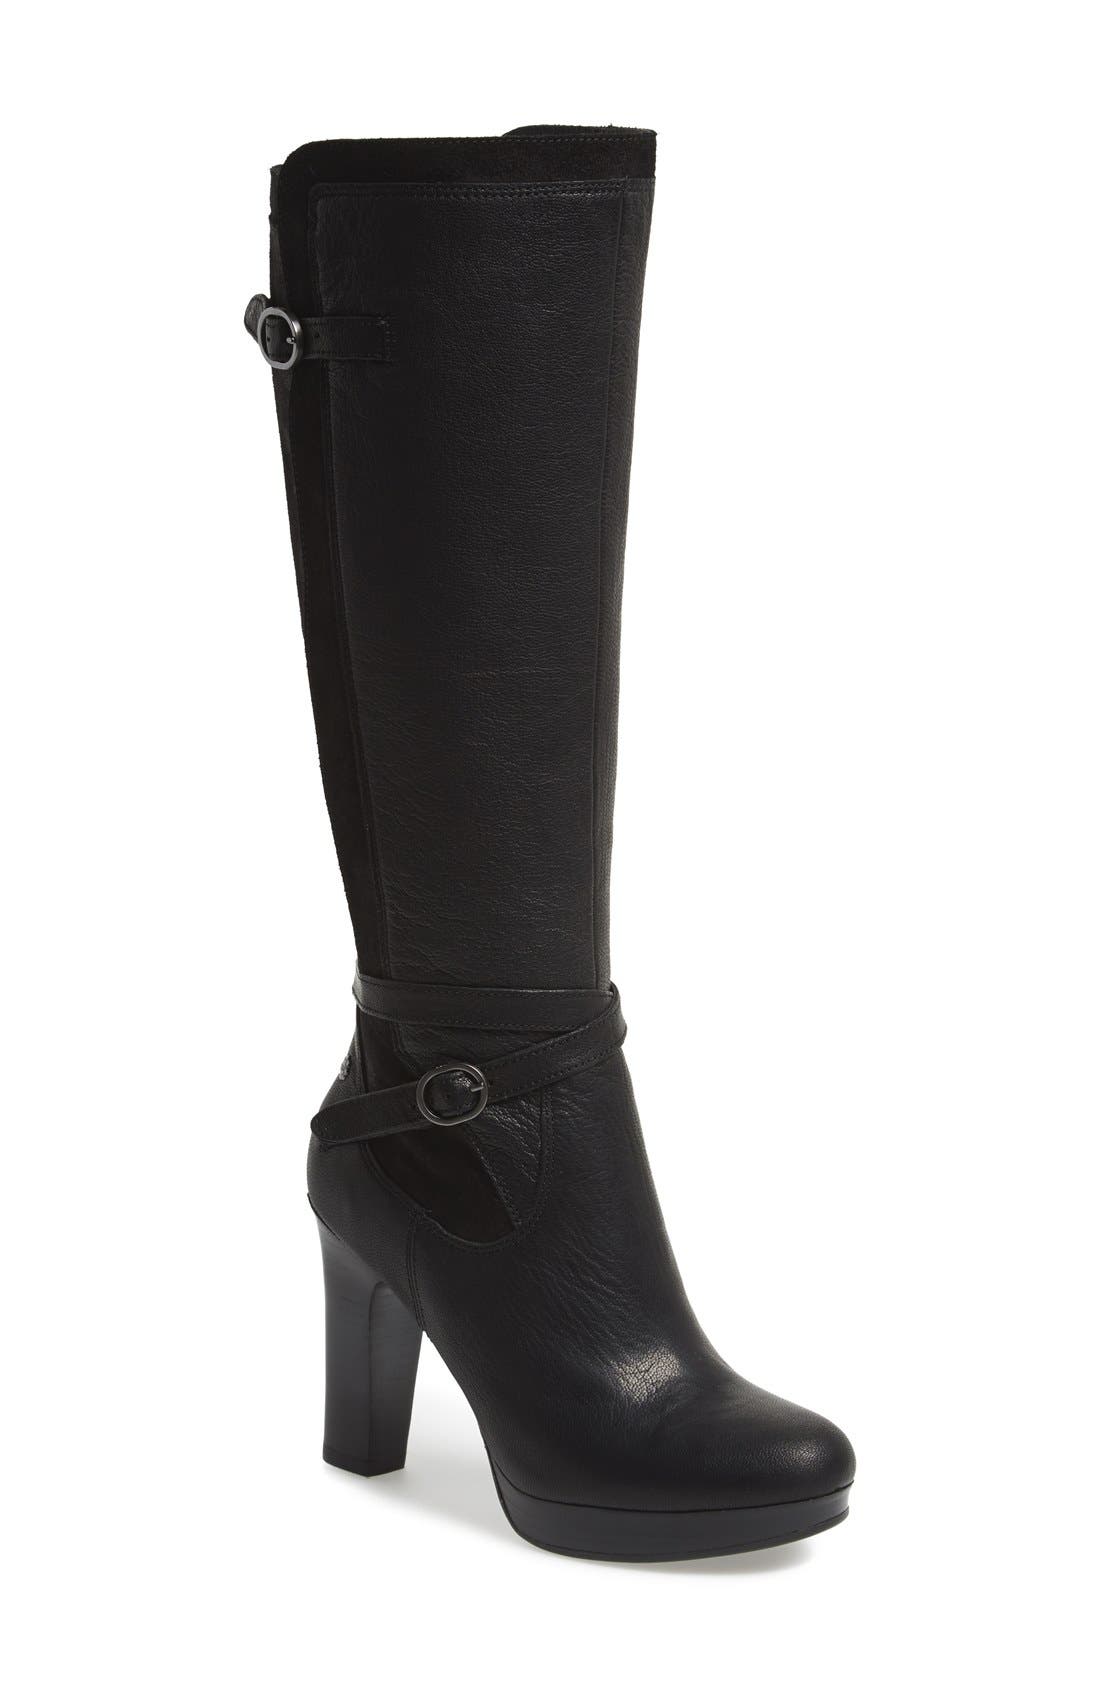 knee high leather ugg boots